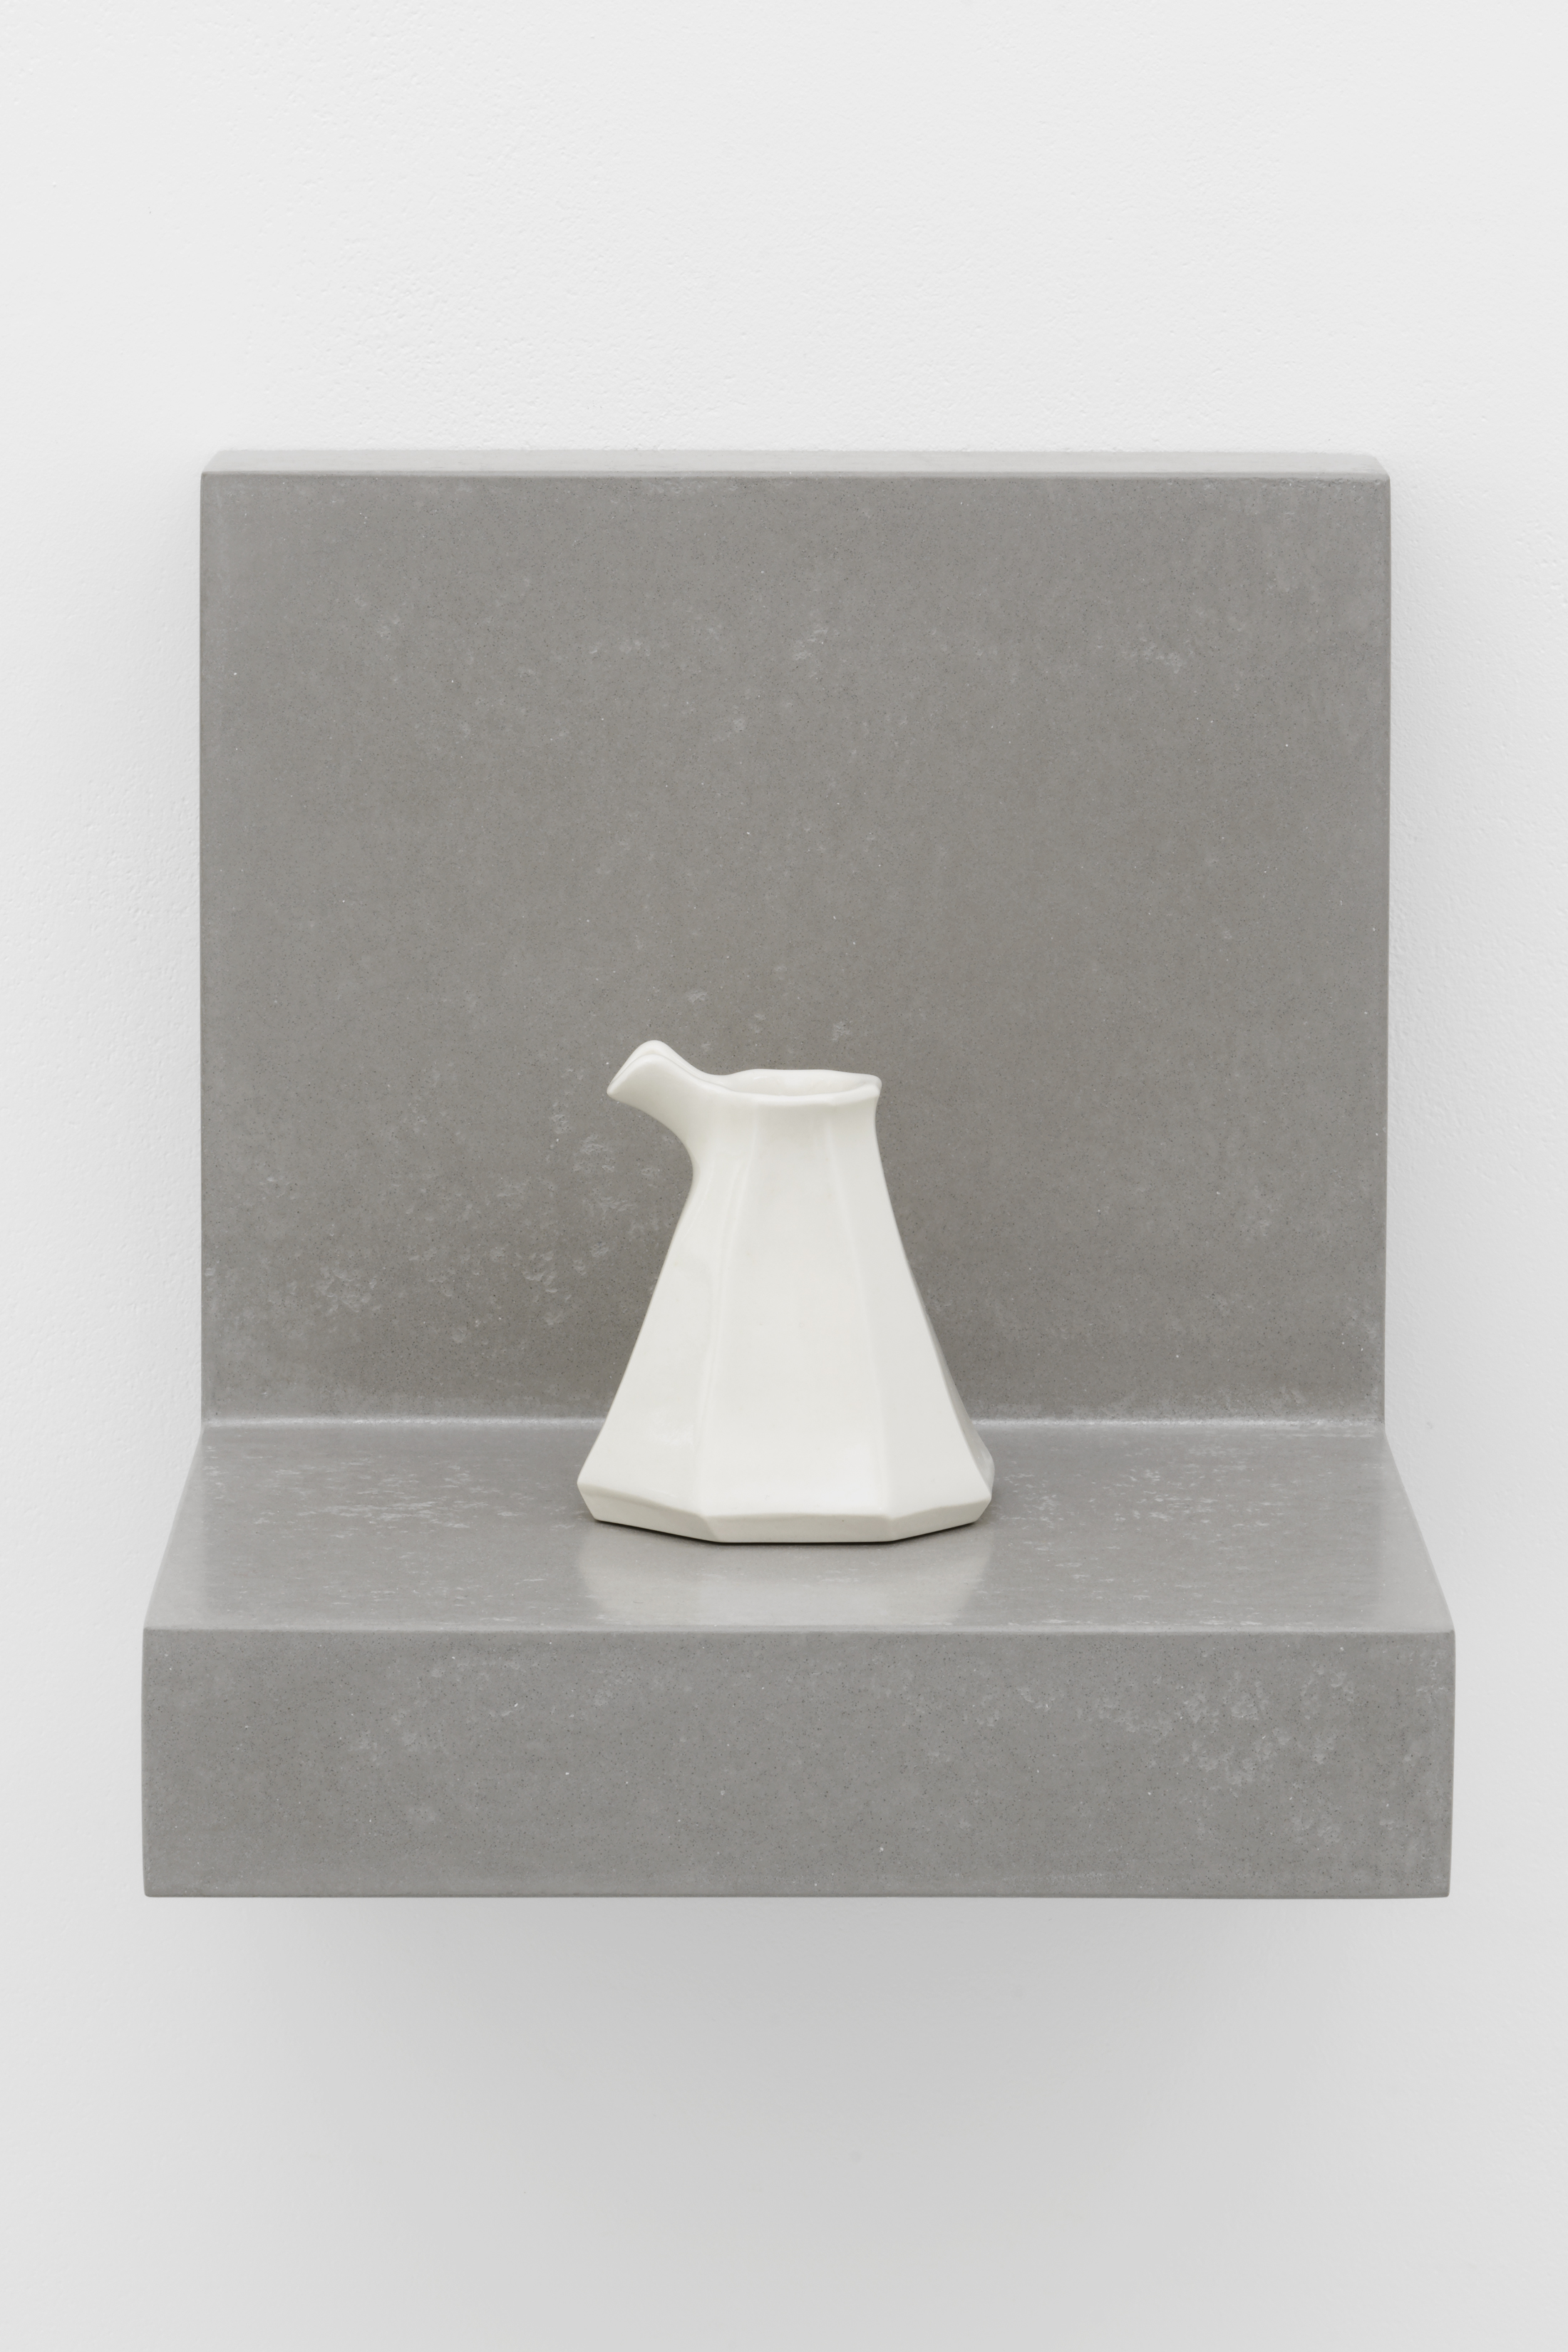 Julian Stair – Faceted Jug on a Floating Ground – 2018, 25×24,5 cm